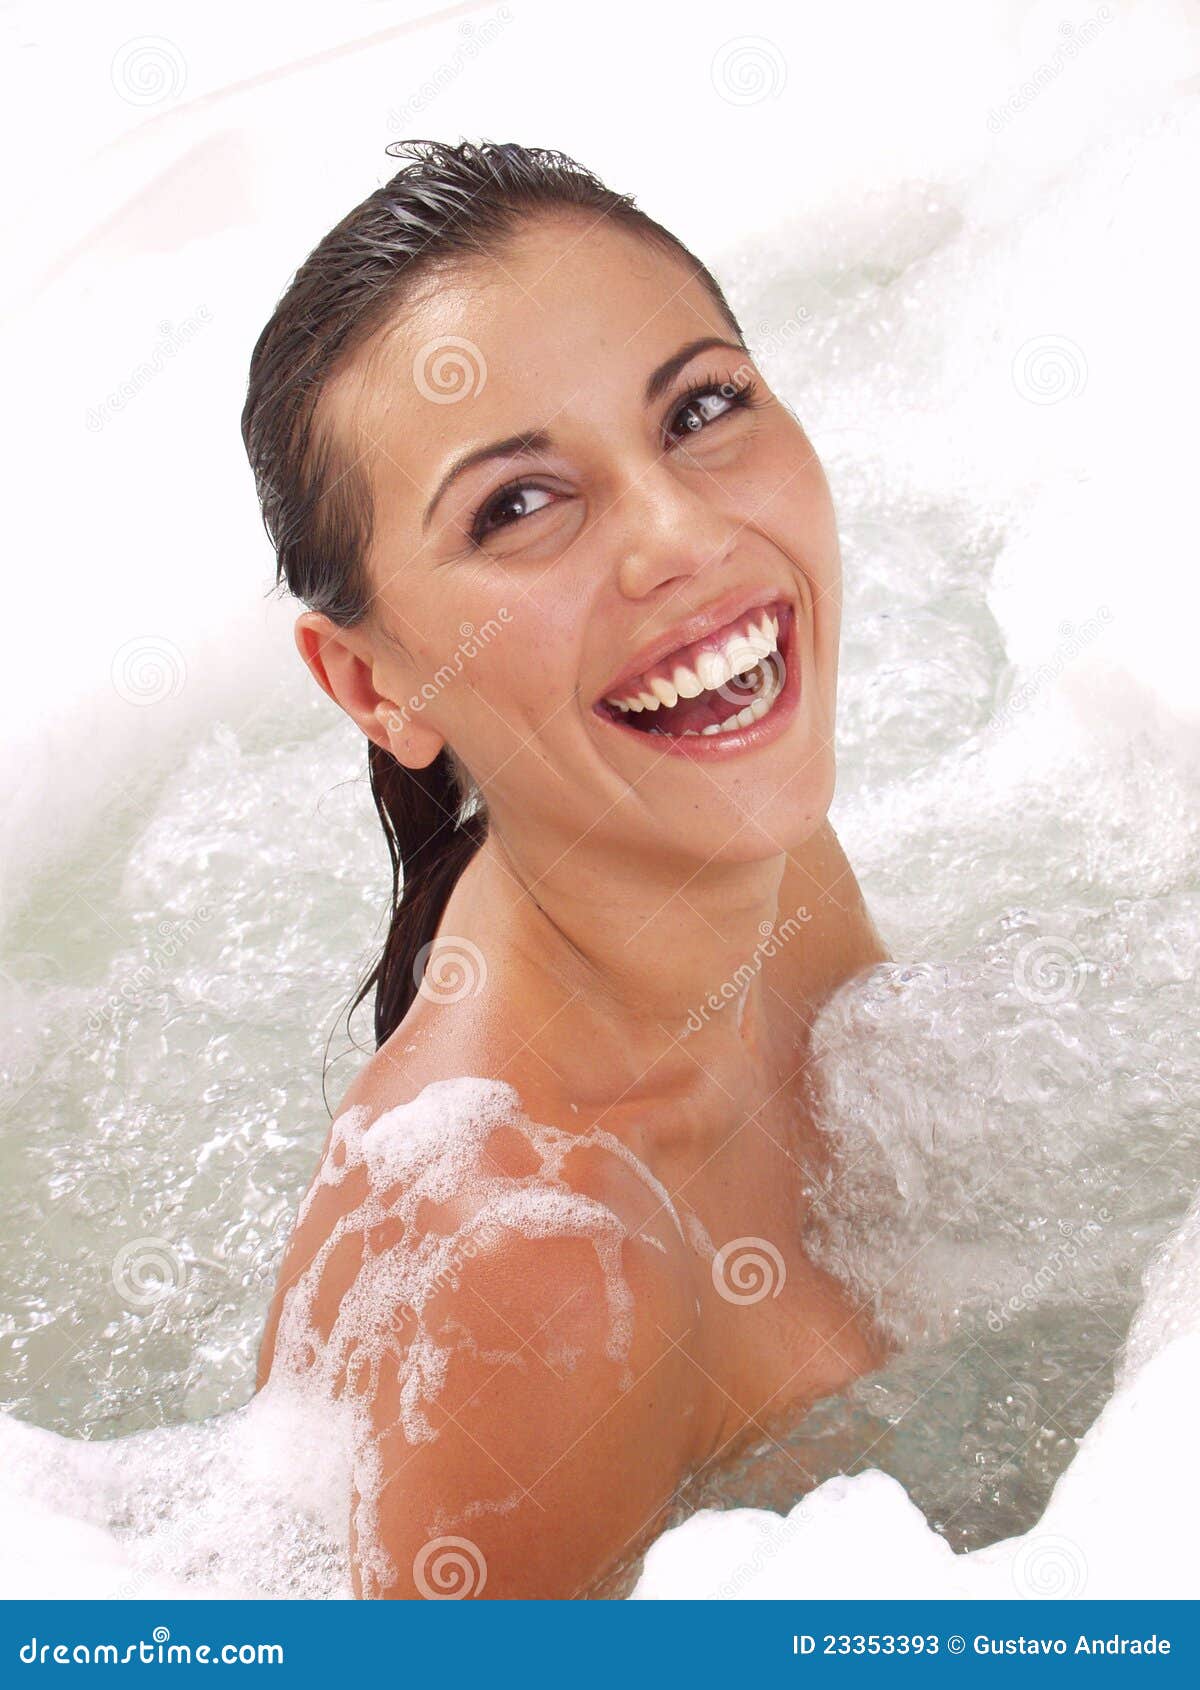 Beugel straffen steeg Beauty Woman Take a Shower. Stock Image - Image of health, holiday: 23353393